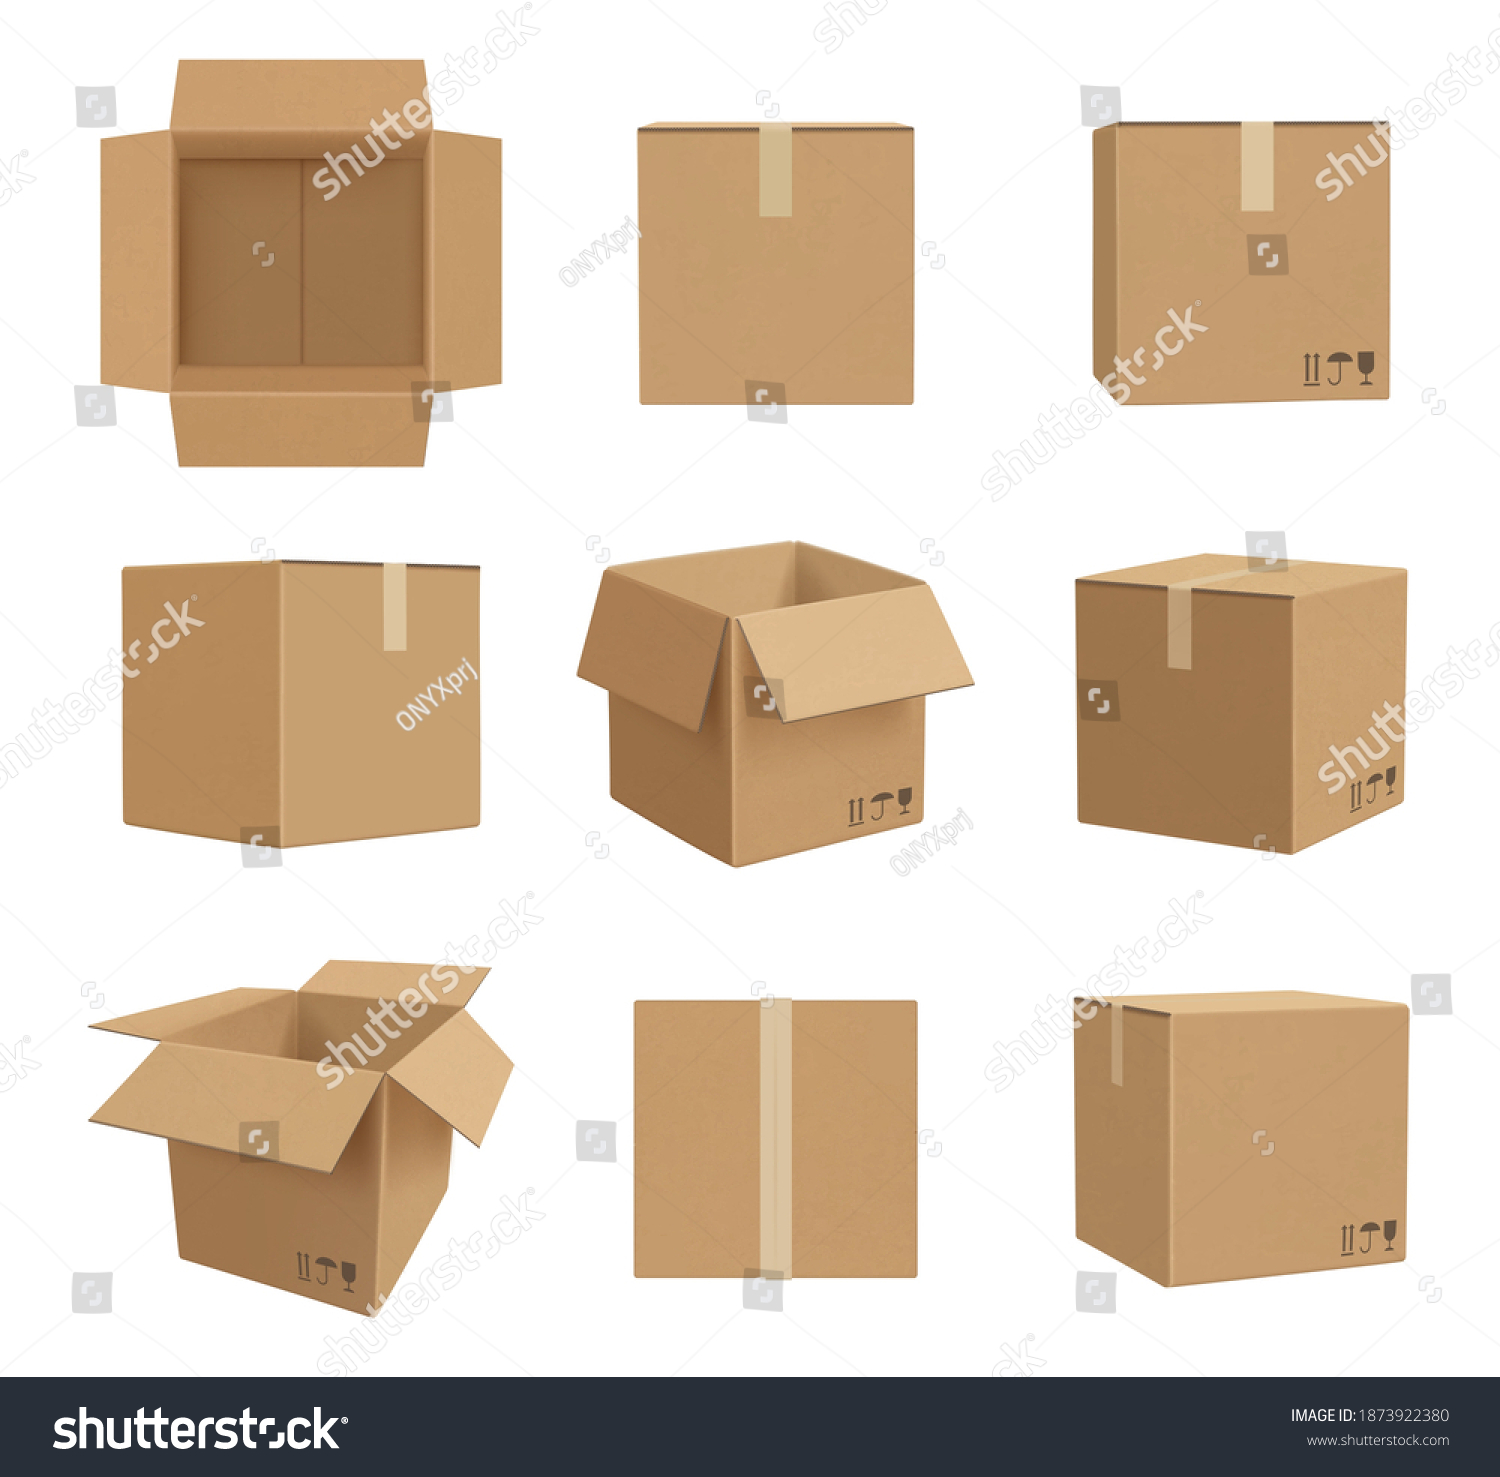 SVG of Cardboard boxes. Deliver craft packages front and side view decent vector realistic illustrations svg